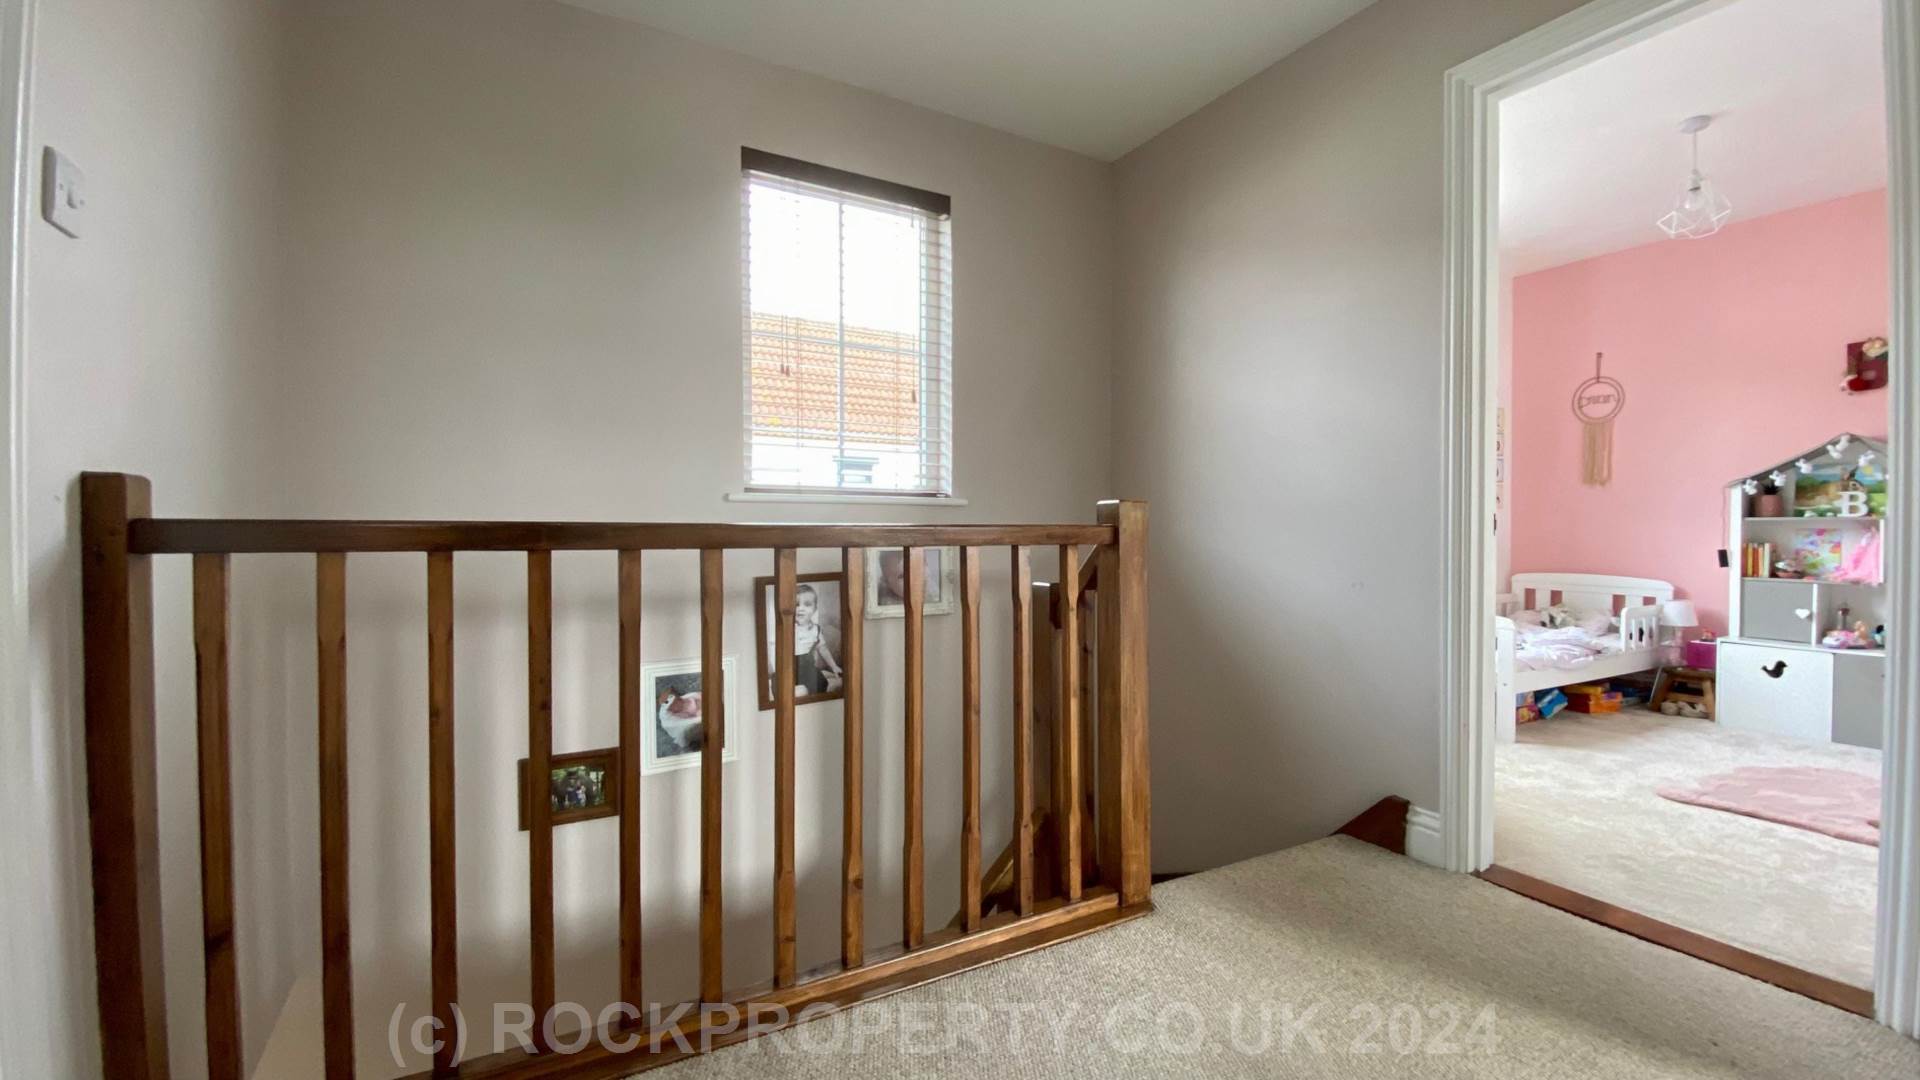 3 DOUBLE BED FAMILY HOME, Popular Sion Village, St John, Image 11